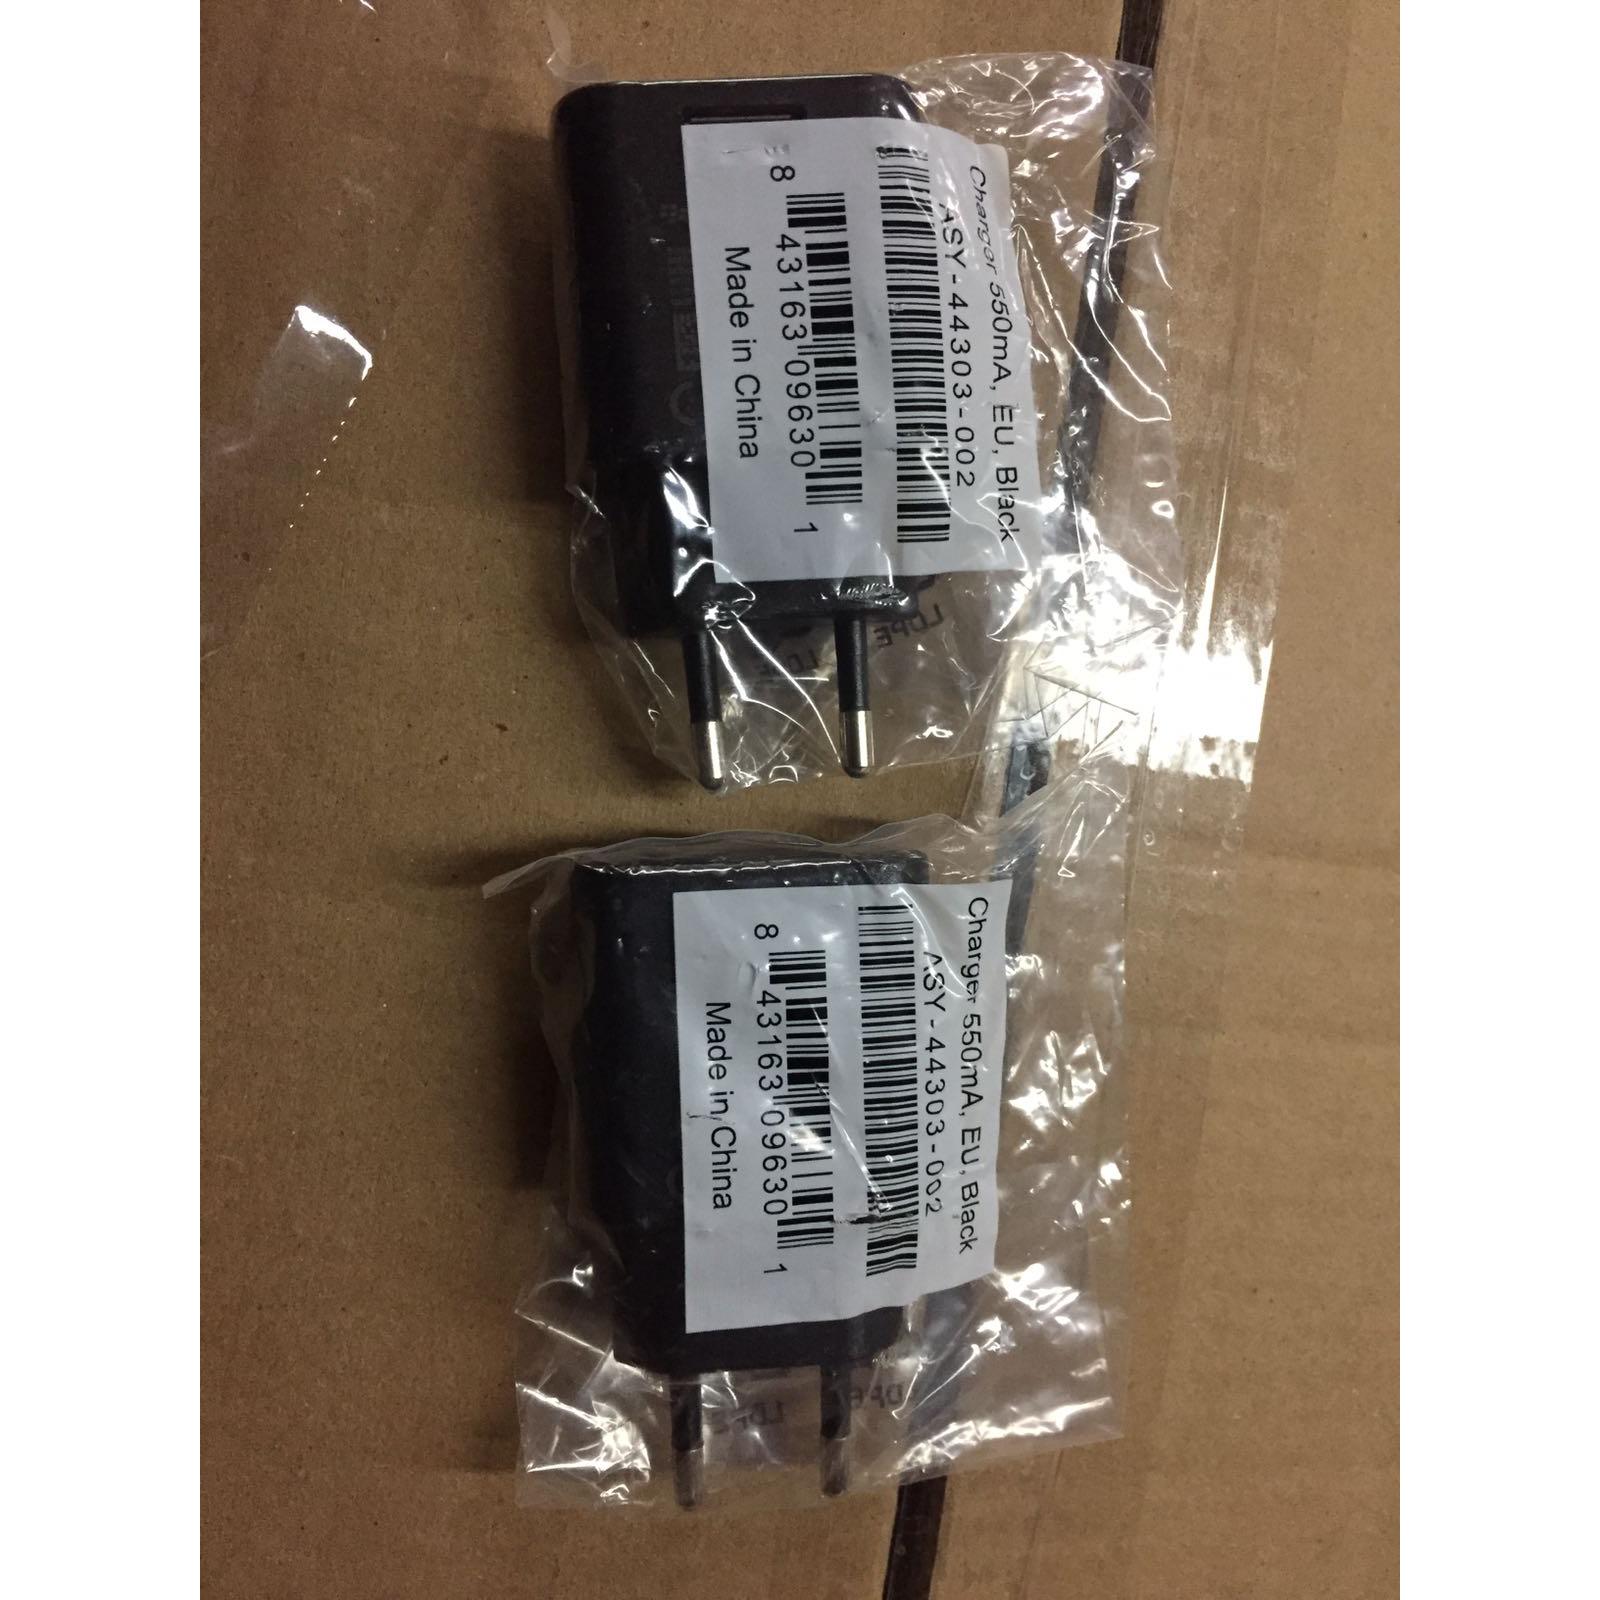 BlackBerry asy-44303 Wholesale Suppliers